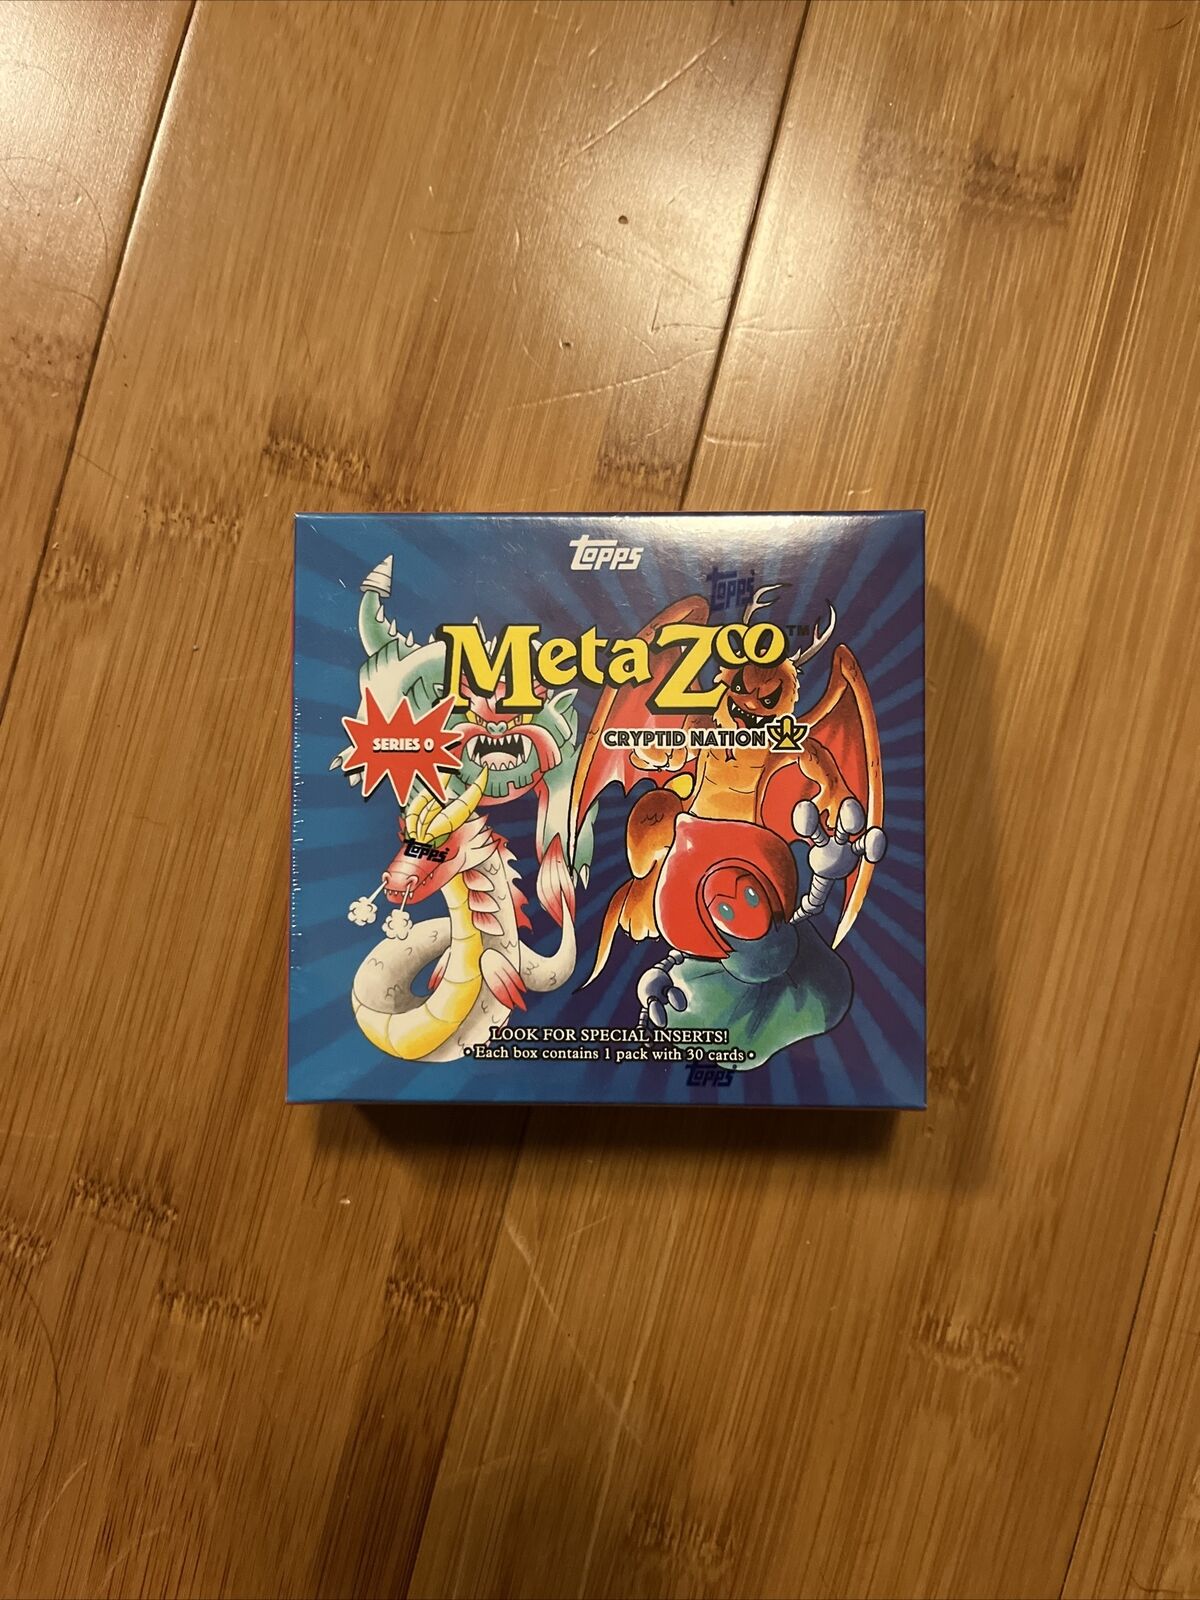 2021 Topps MetaZoo Cryptid Nation Series 0 - 30-Card Pack Sealed Box In Hand